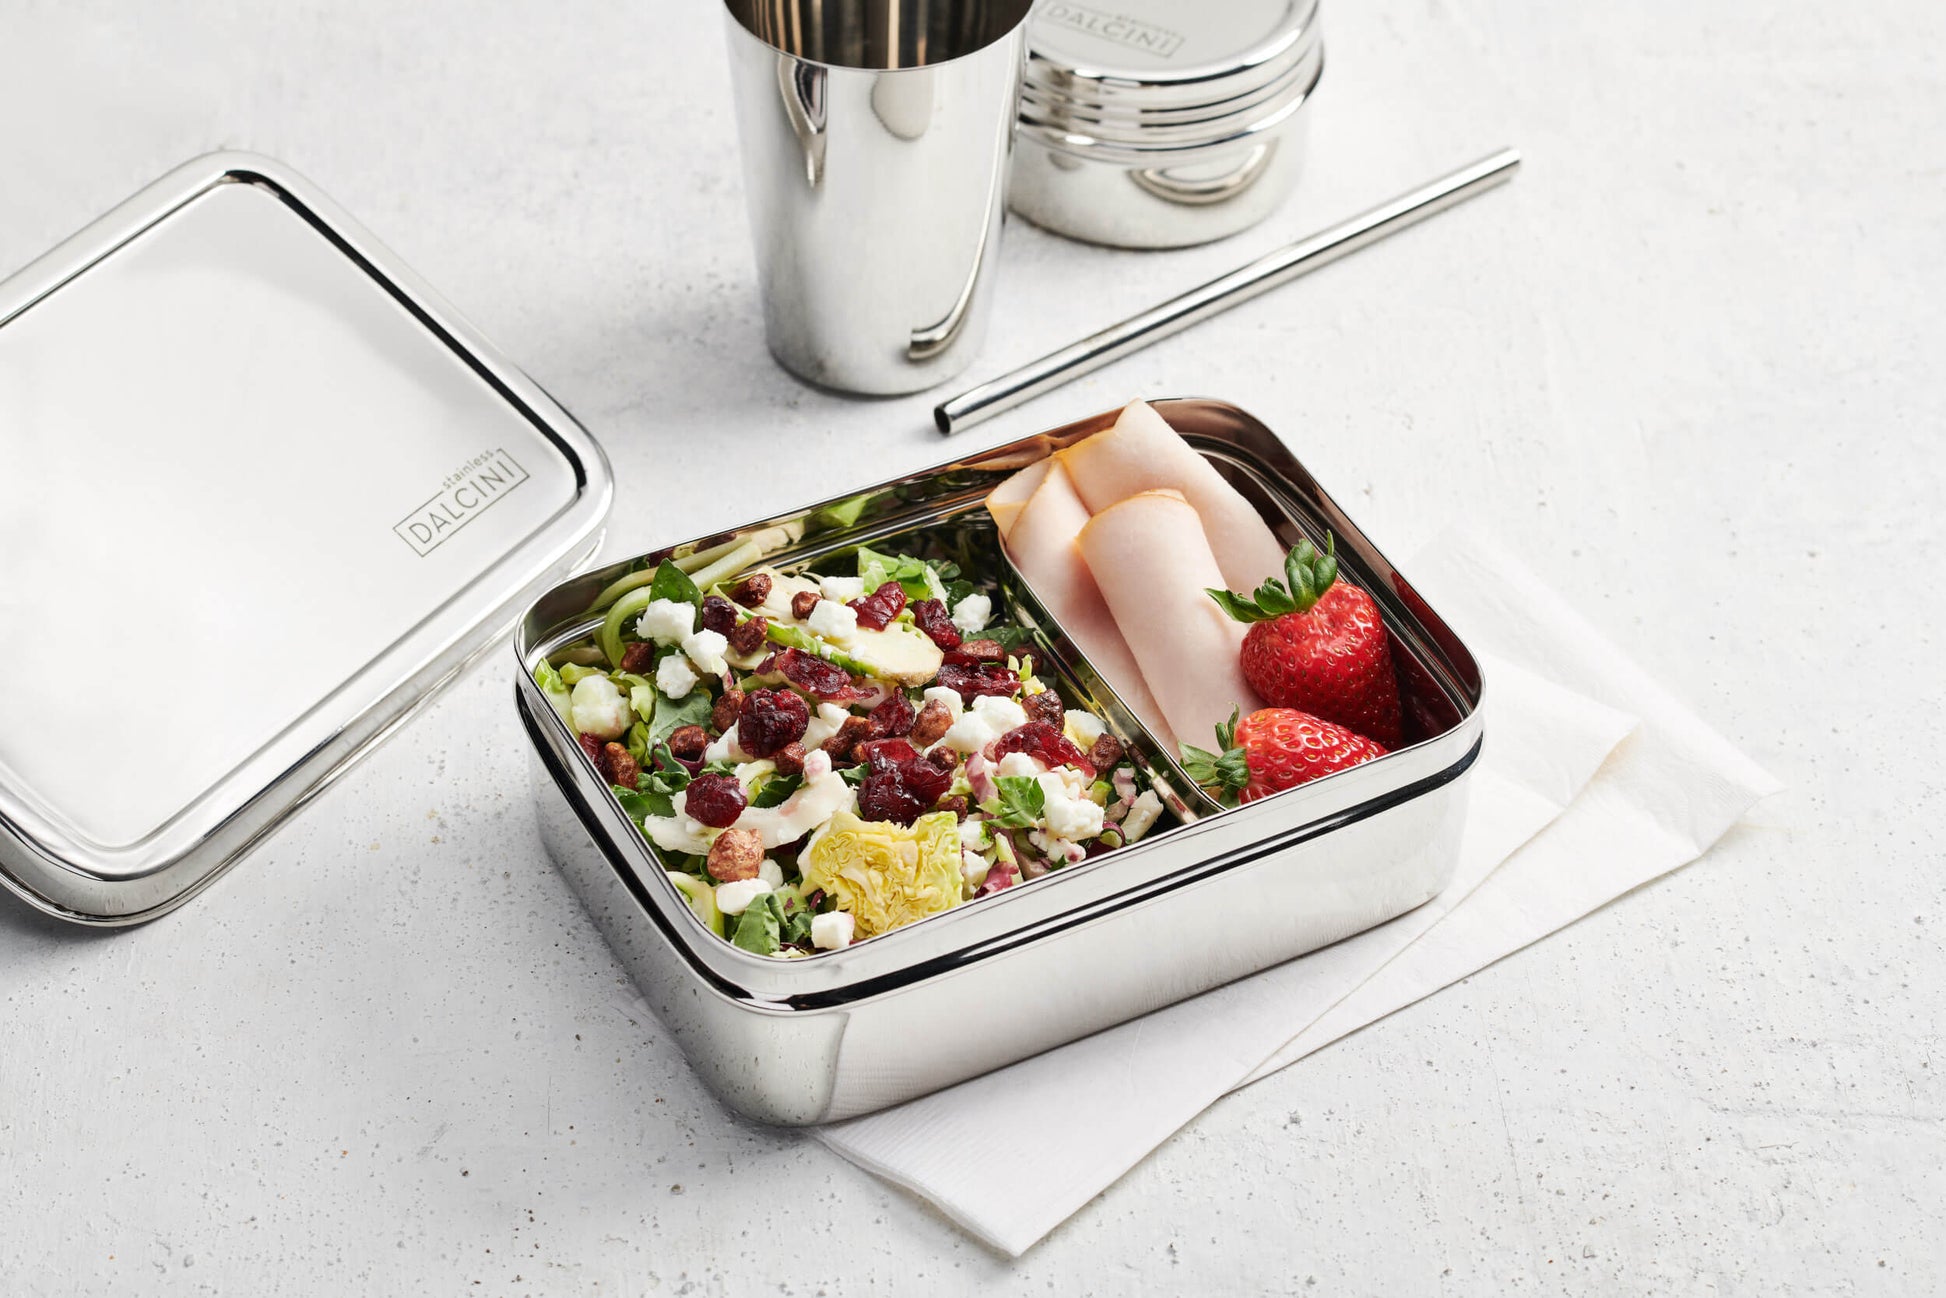 Salad, ham, and strawberries in stainless steel bento box next to stainless steel straw and tumbler